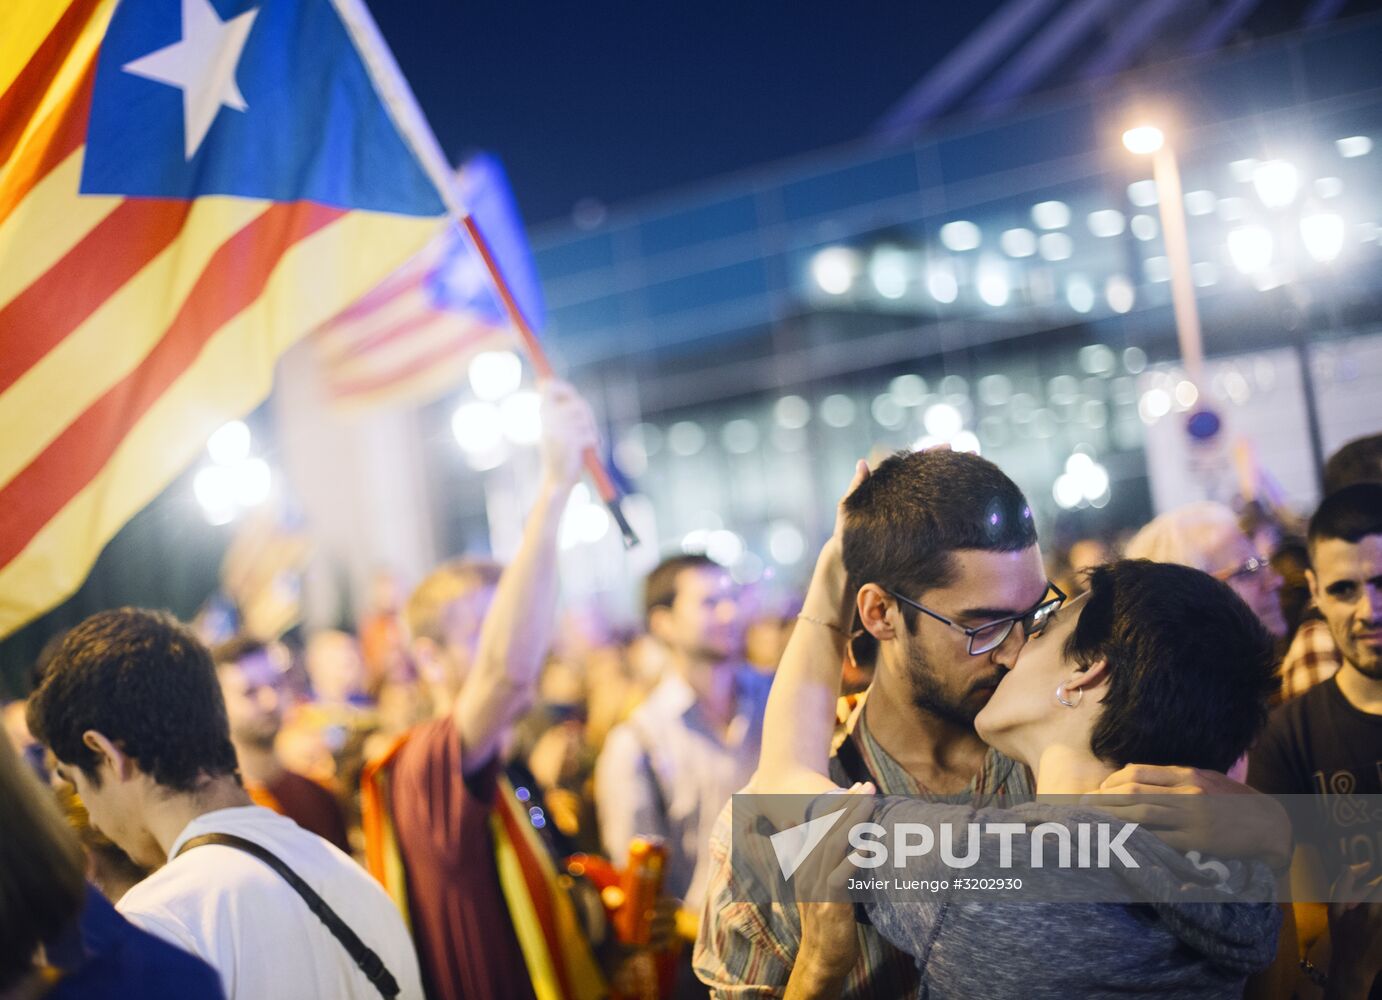 Rally in Barcelona on Catalan independence referendum